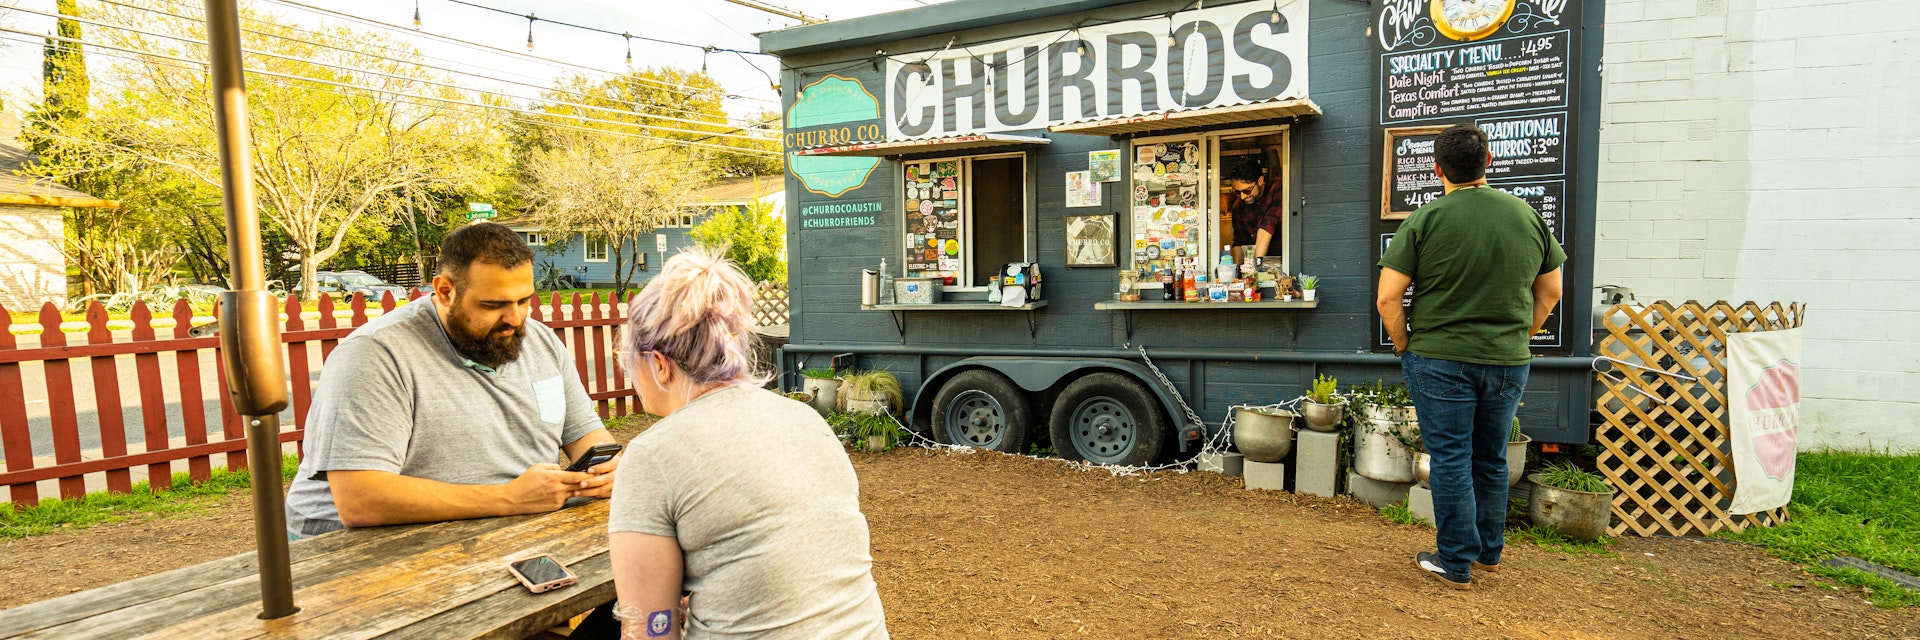 AUSTIN - CIRCA MAY 2019: People eat at a local food truck called Austin Churro Co. in east Austin, Texas. The food truck a wide variety of delicious desserts.